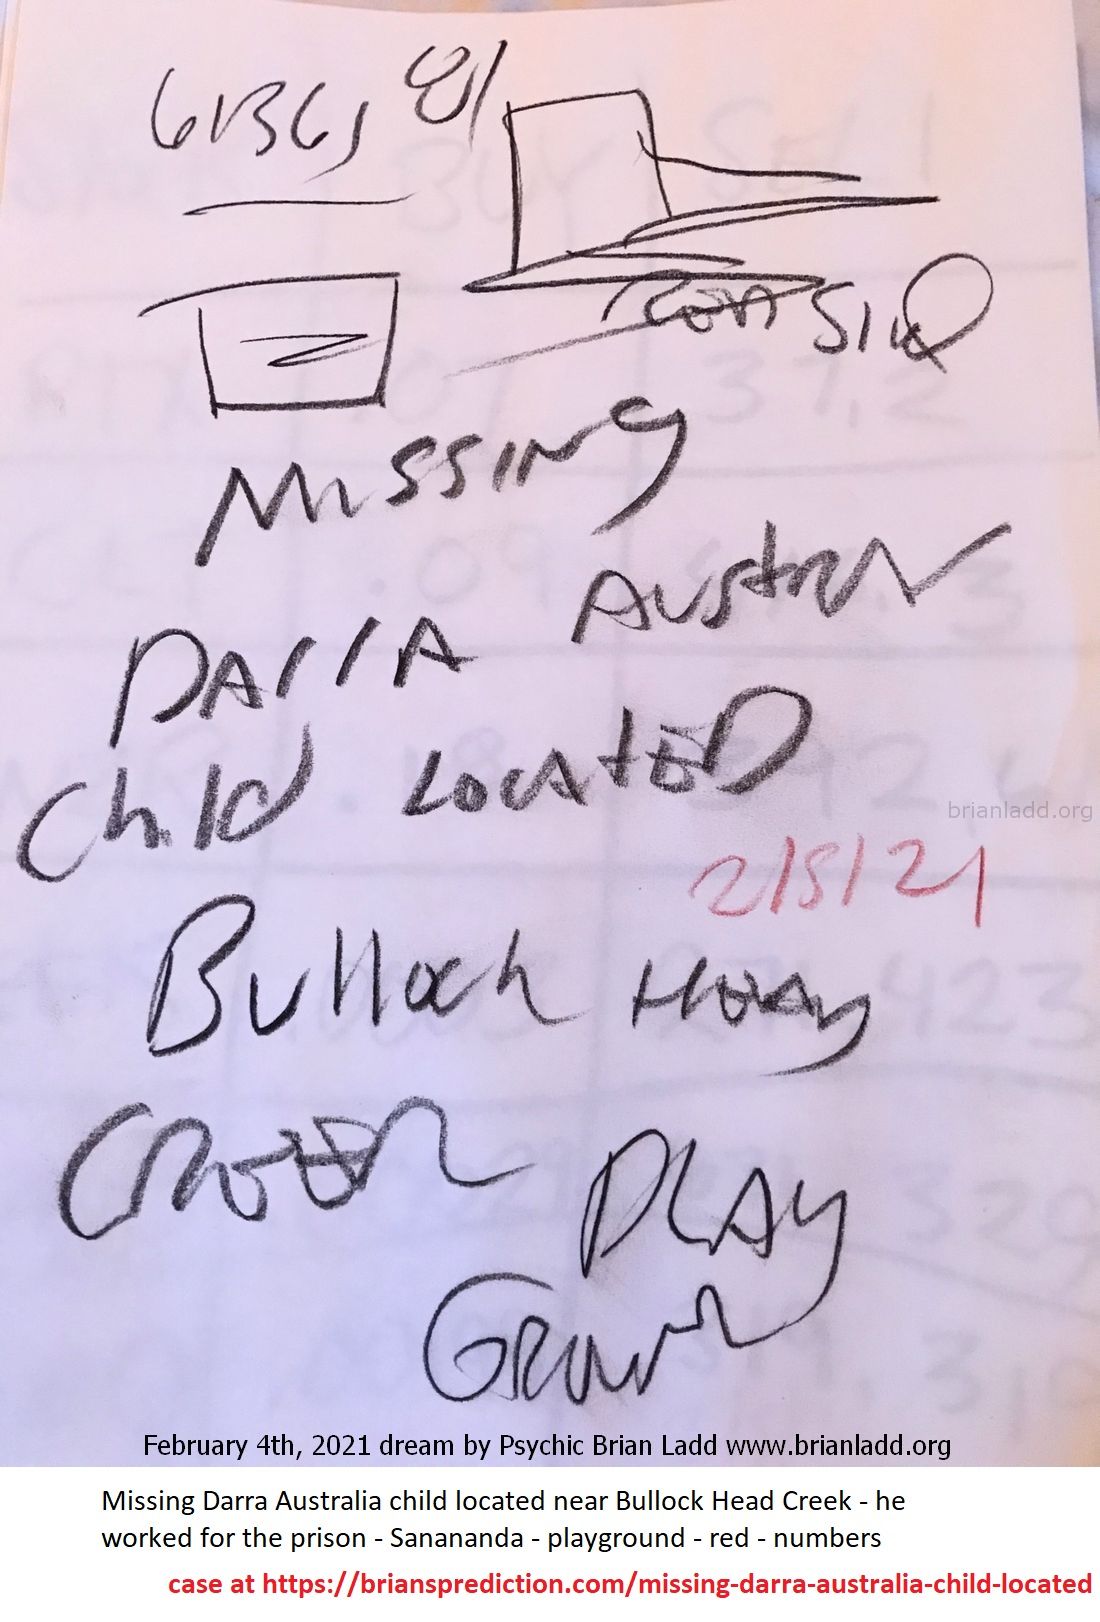 14413 5 February 2021 1 - Missing Darra Australia Child Located Near Bullock Head Creek - He Worked For The Prison - San...
Missing Darra Australia Child Located Near Bullock Head Creek - He Worked For The Prison - Sanananda - Playground - Red - Numbers.
